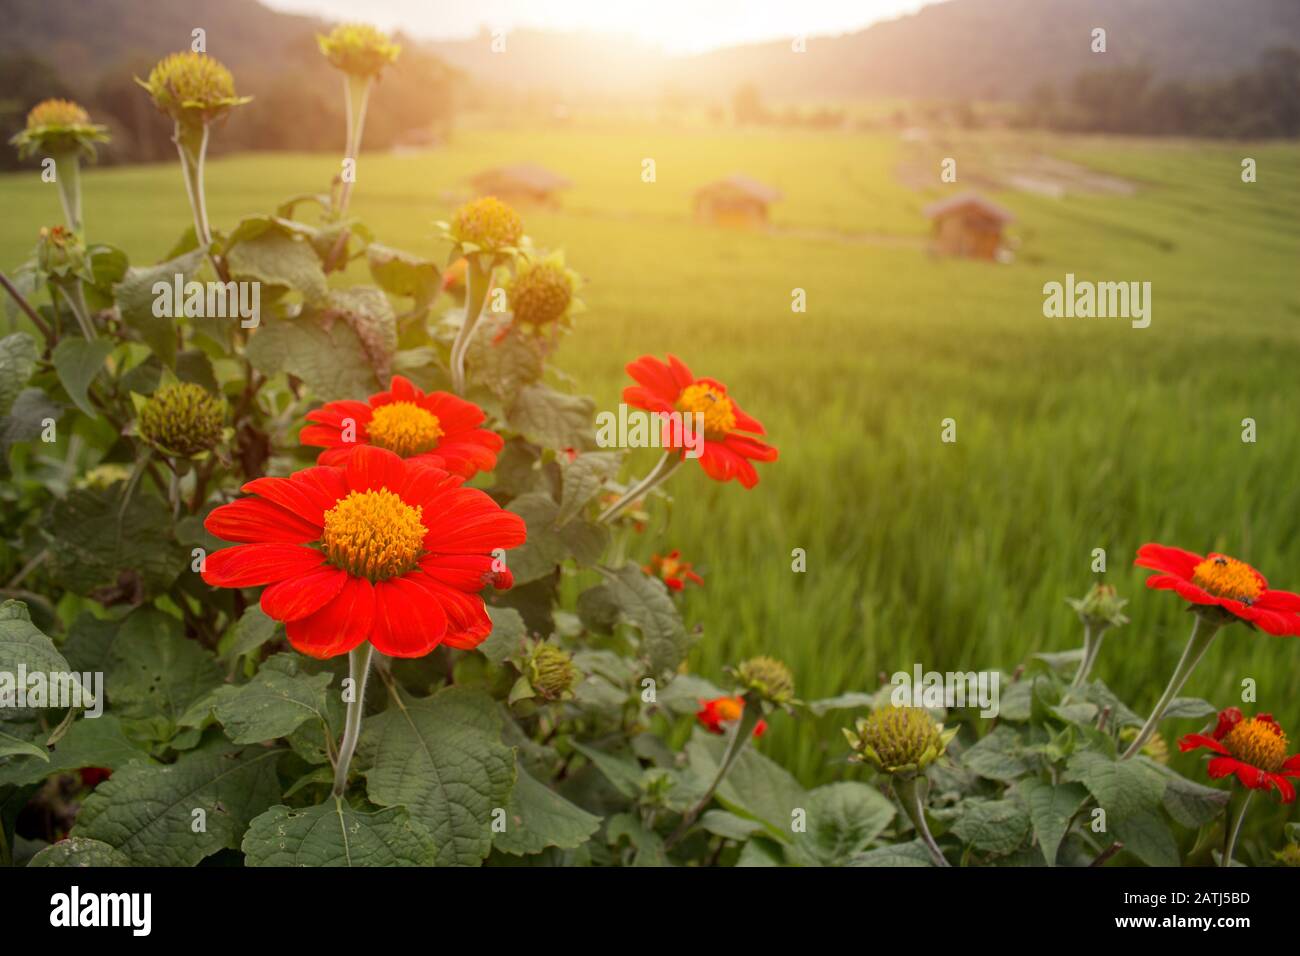 Klang Luang  Chiang Mai Thailand The red flower in front and rice field this is a beautiful landscape of Thailand. Stock Photo